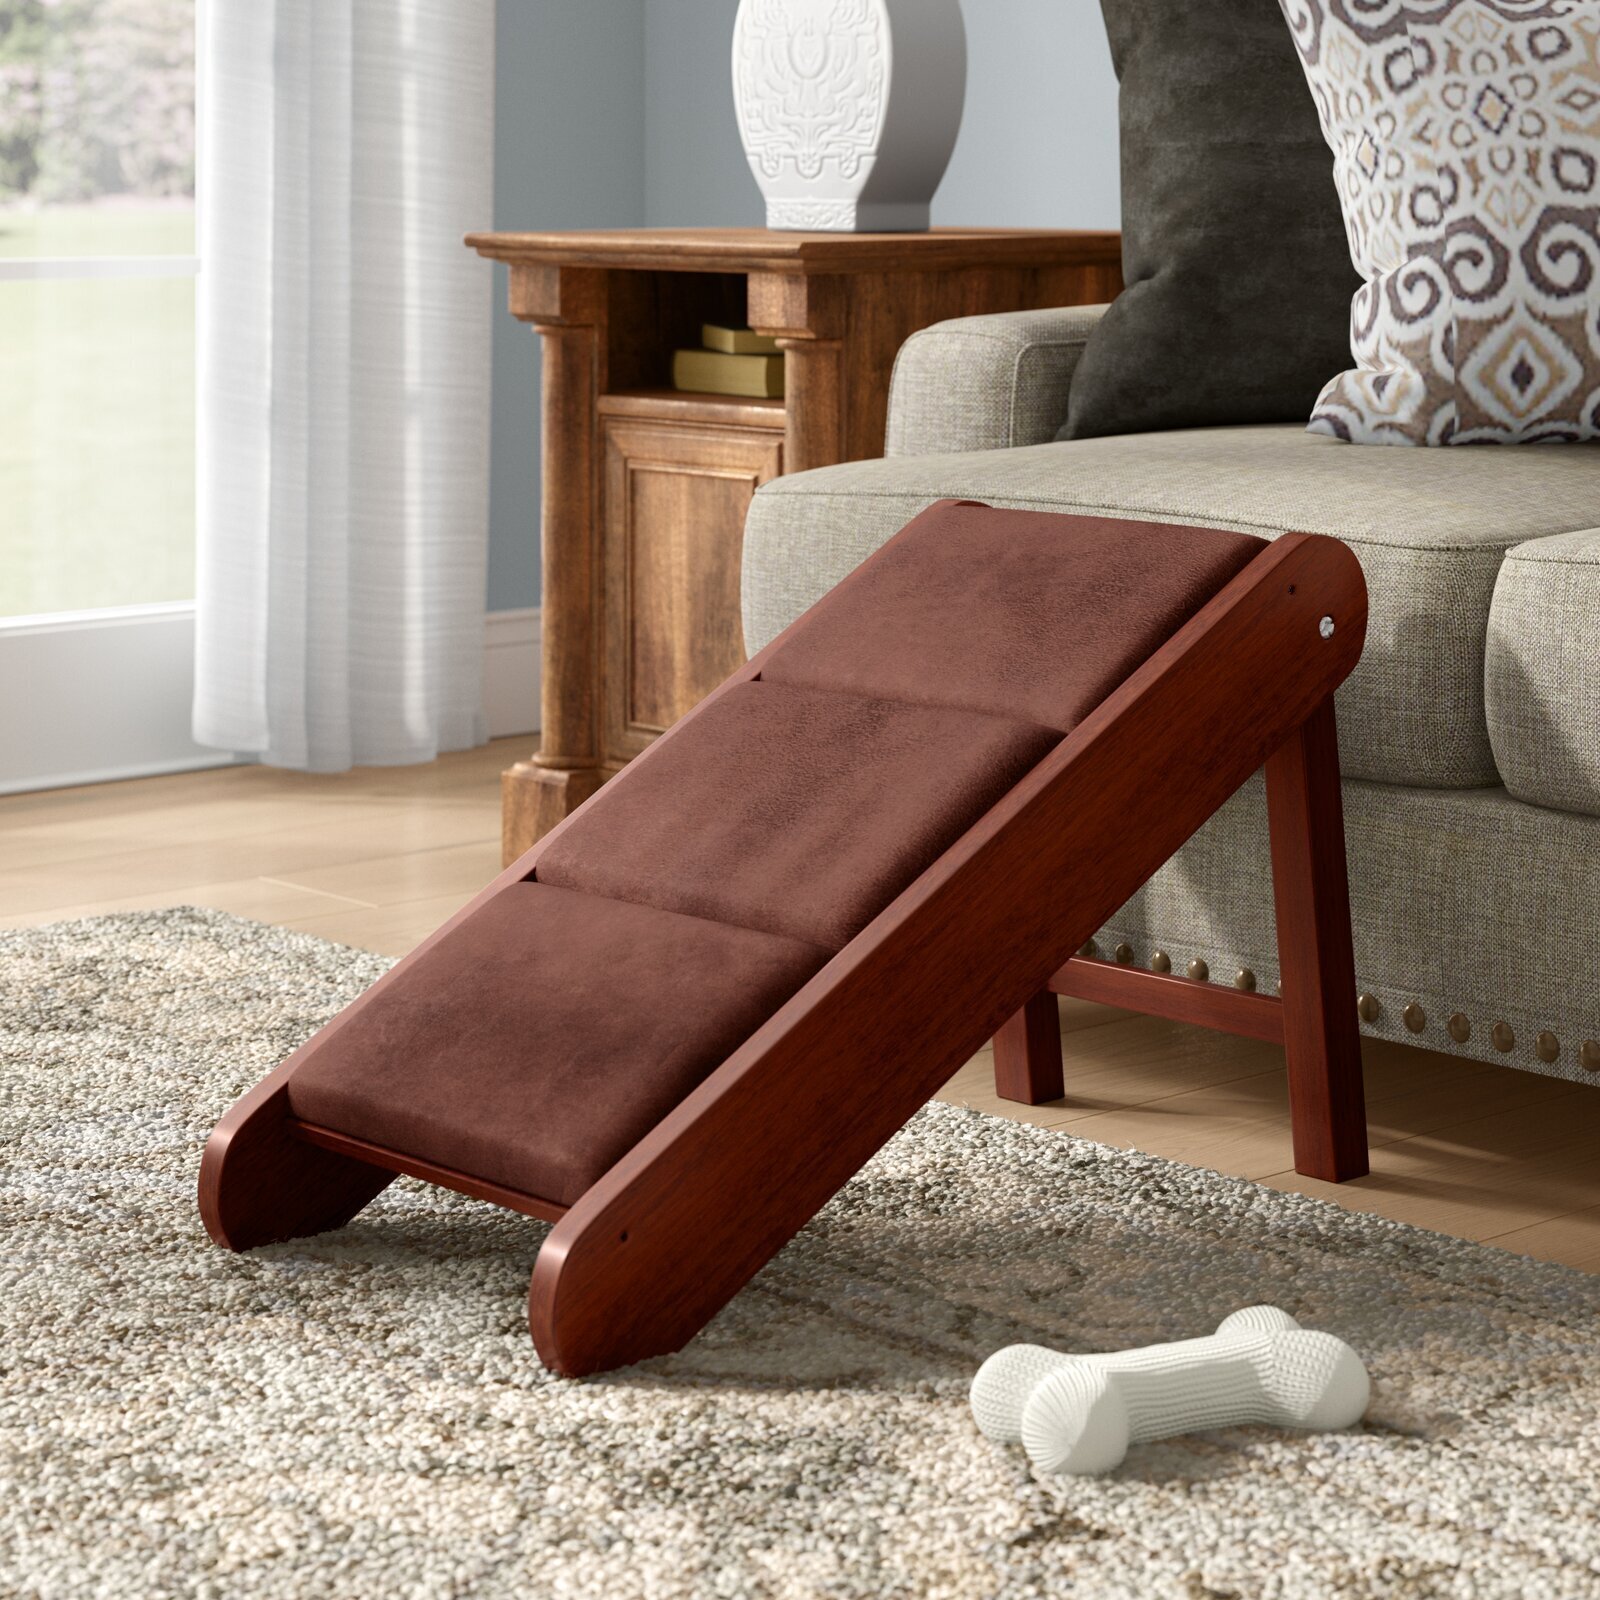 Foldable Dog Ramp for High Bed